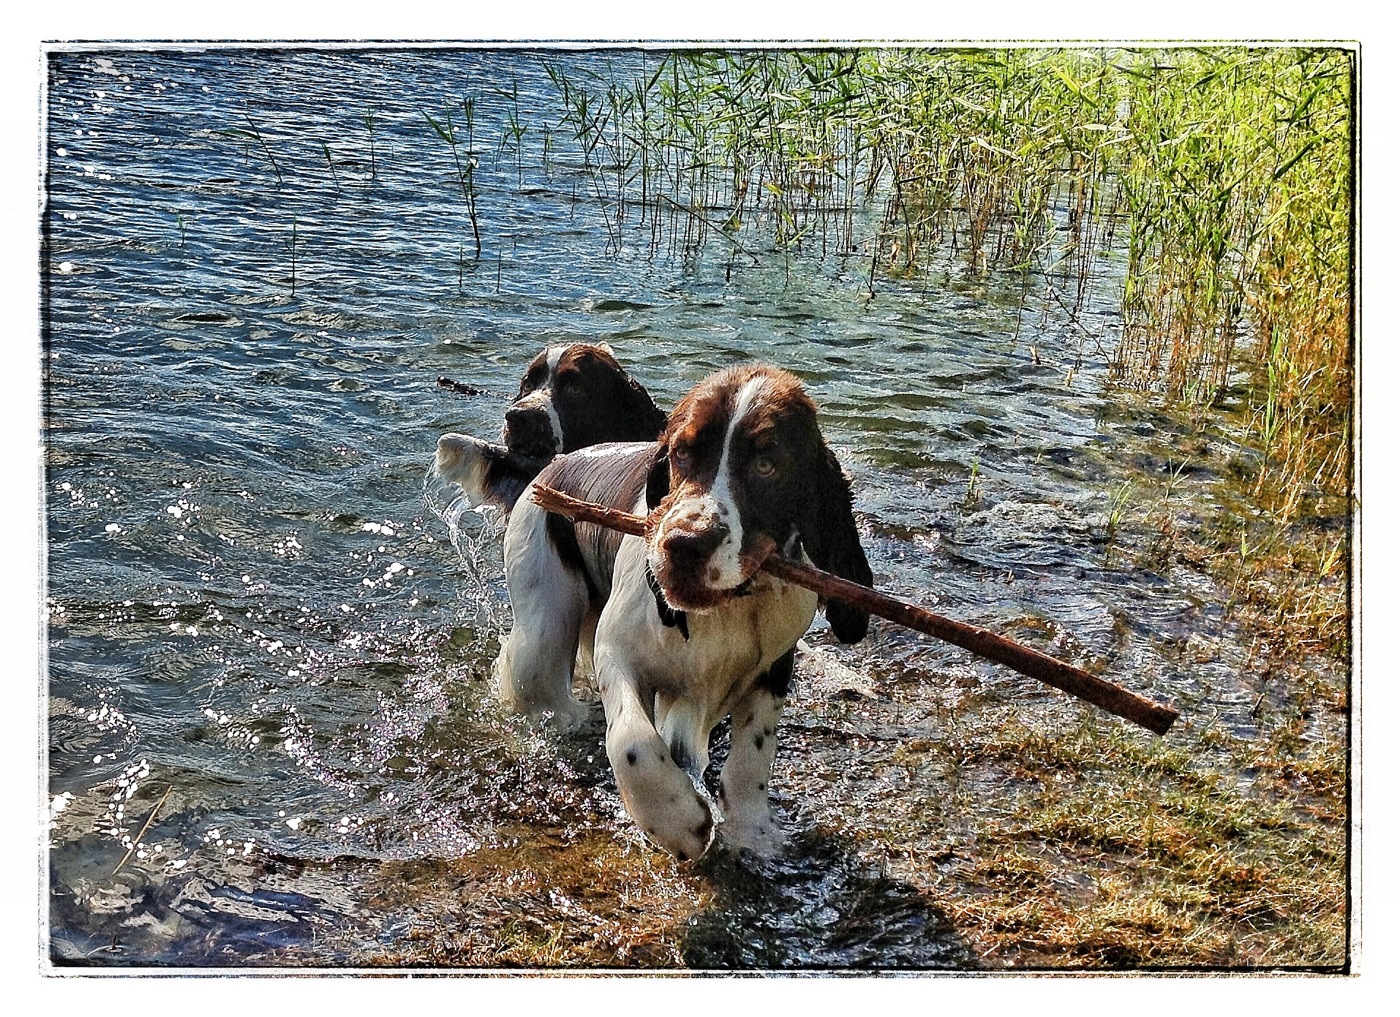 Jack with his huge stick...